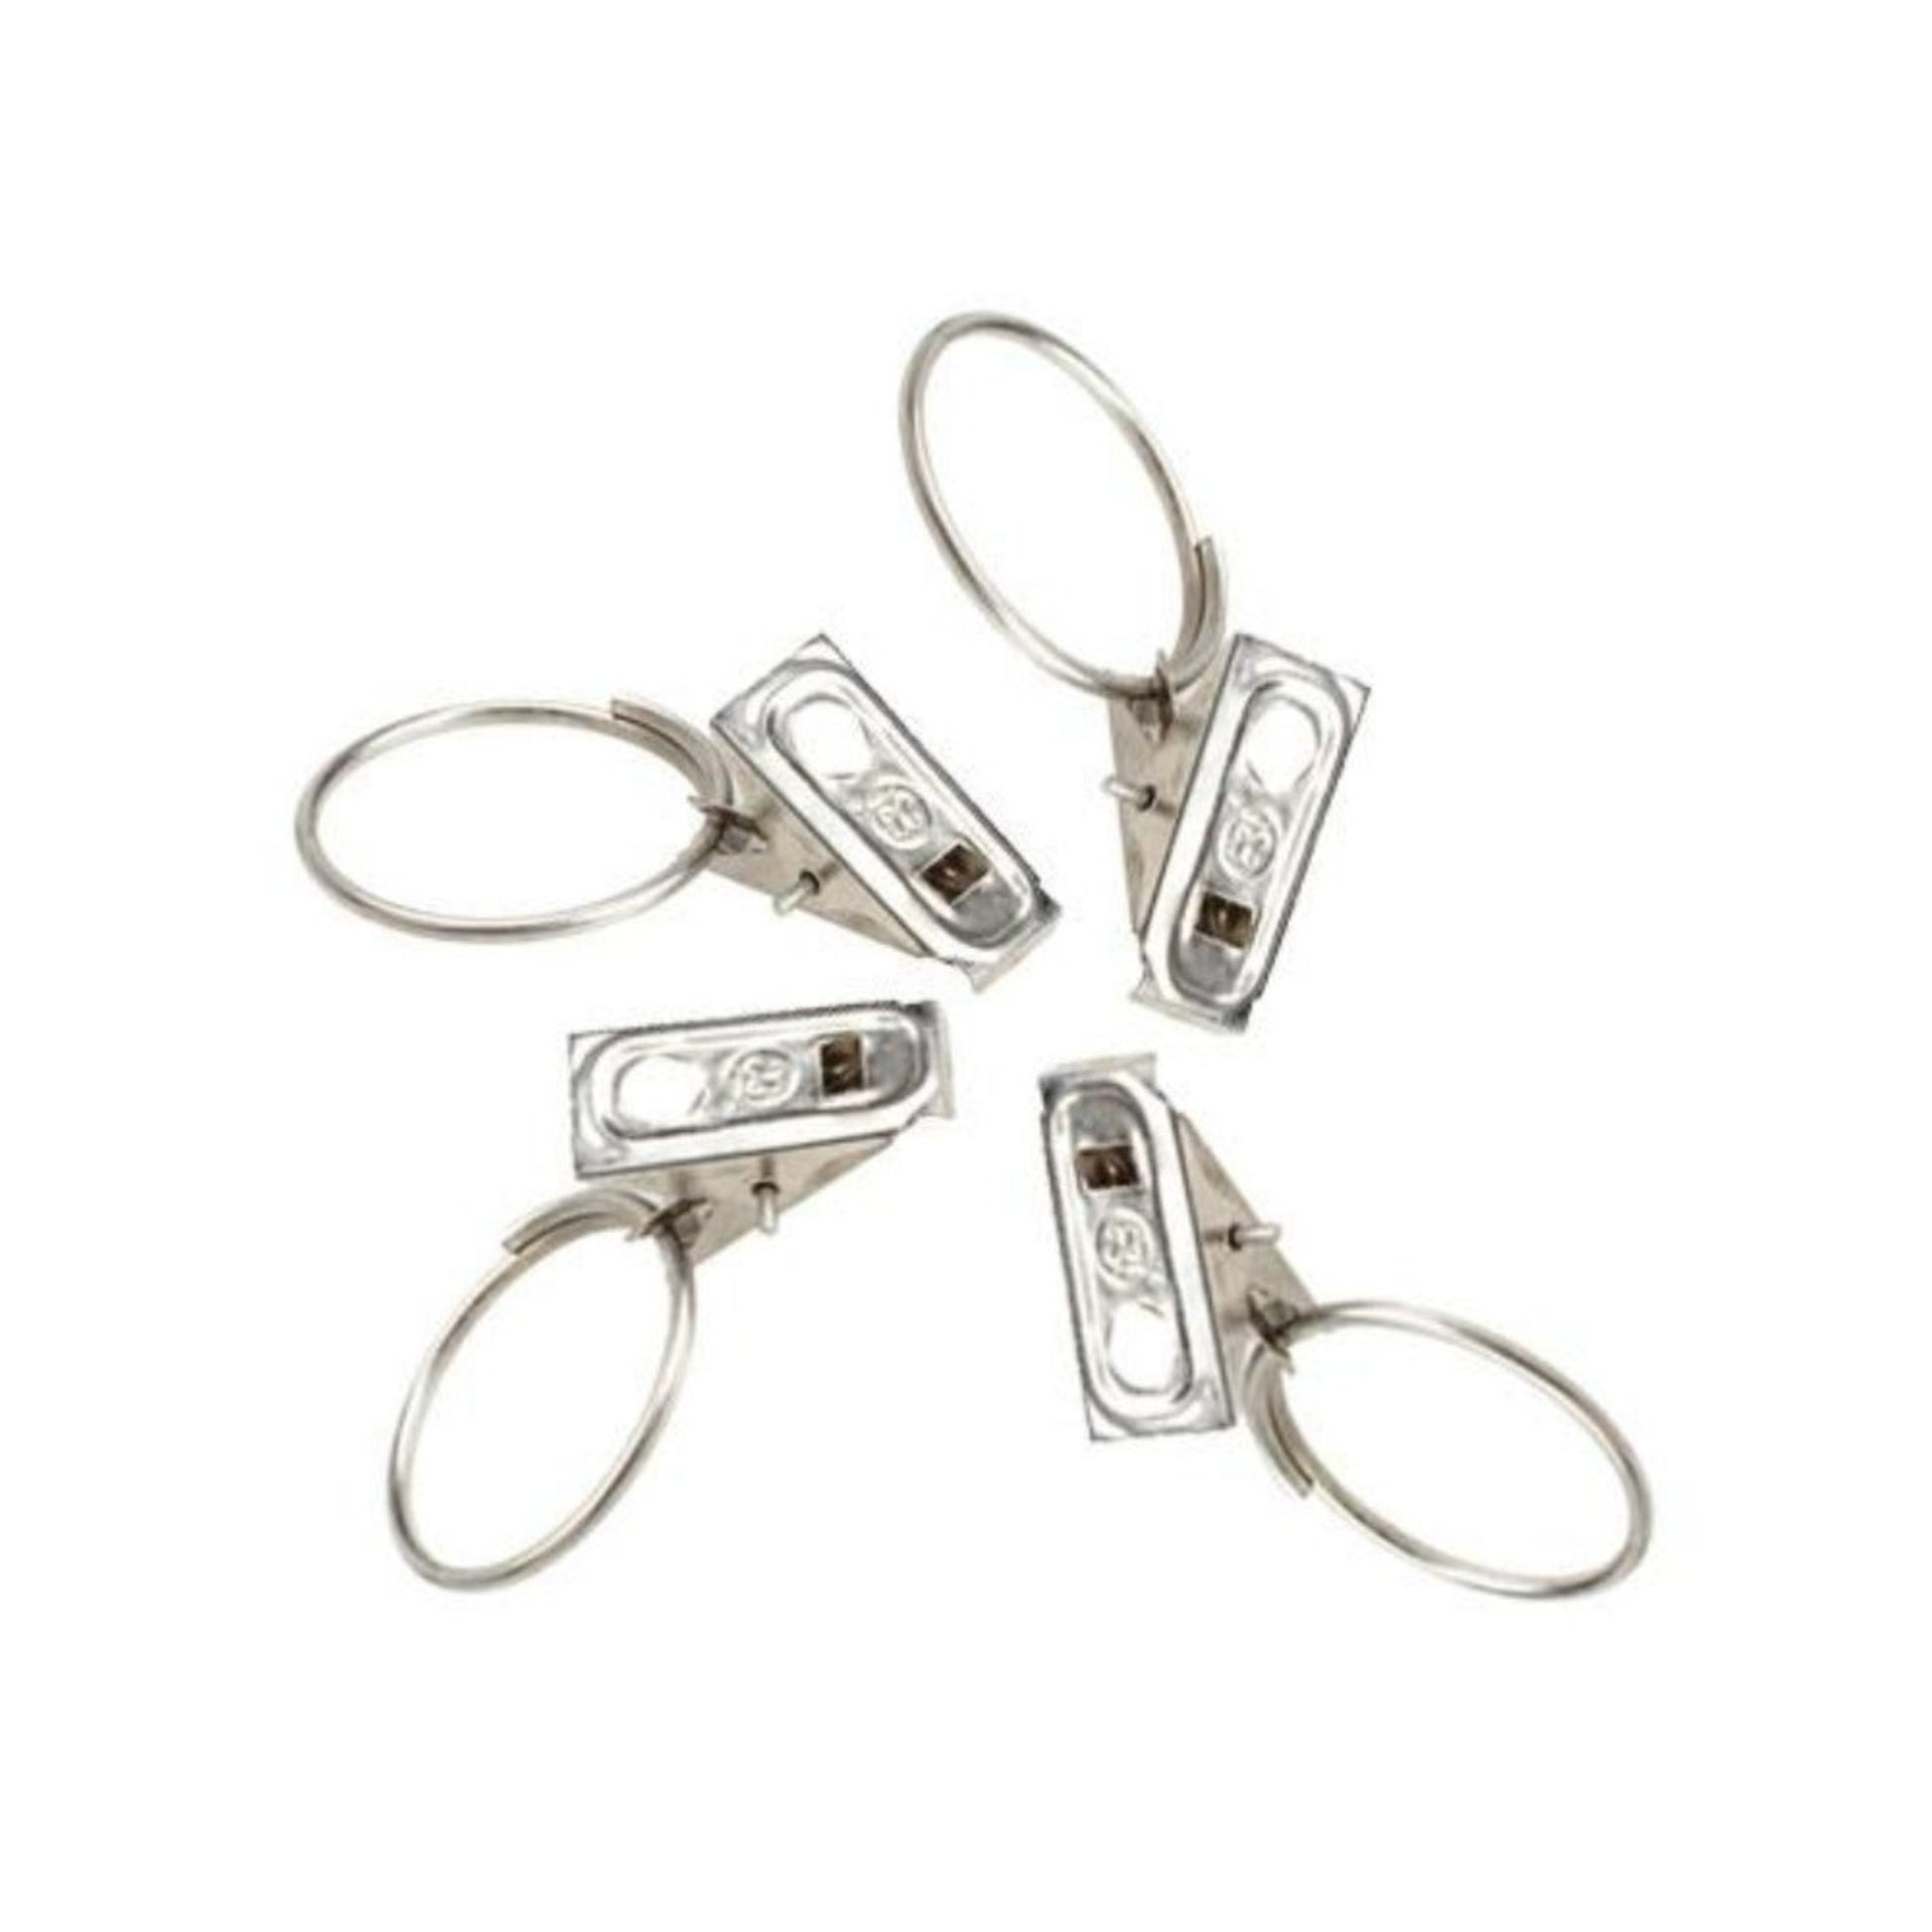 Stainless Steel Window Curtain or Shower Curtain Clips Set